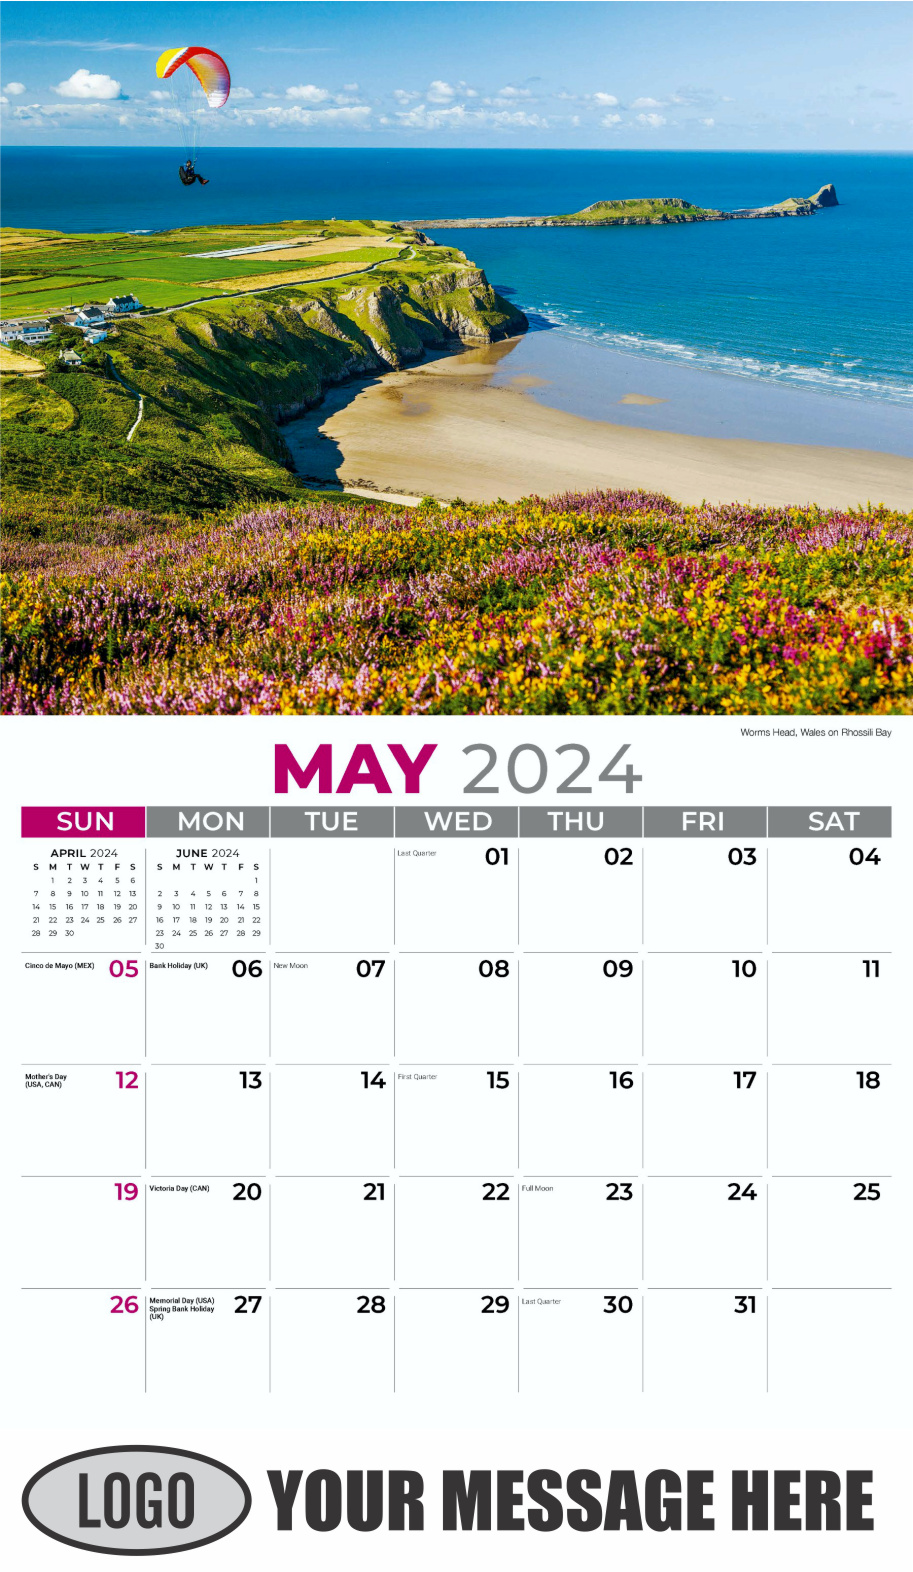 Sun, Sand and Surf 2024 Business Advertsing Wall Calendar - May